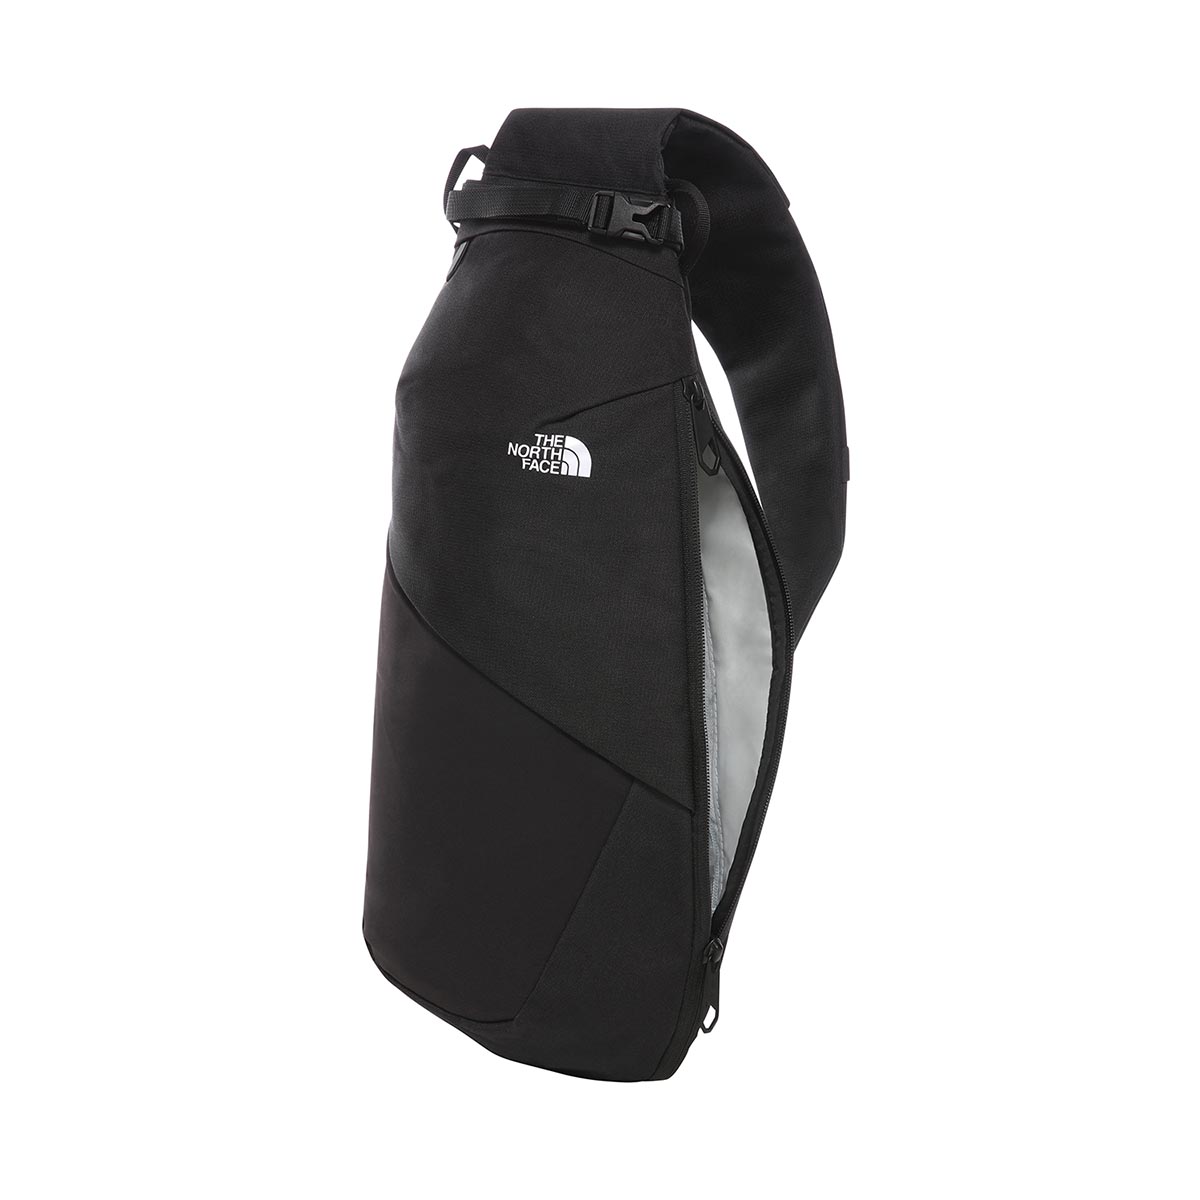 THE NORTH FACE - ELECTRA SLING LARGE PACK 9 L